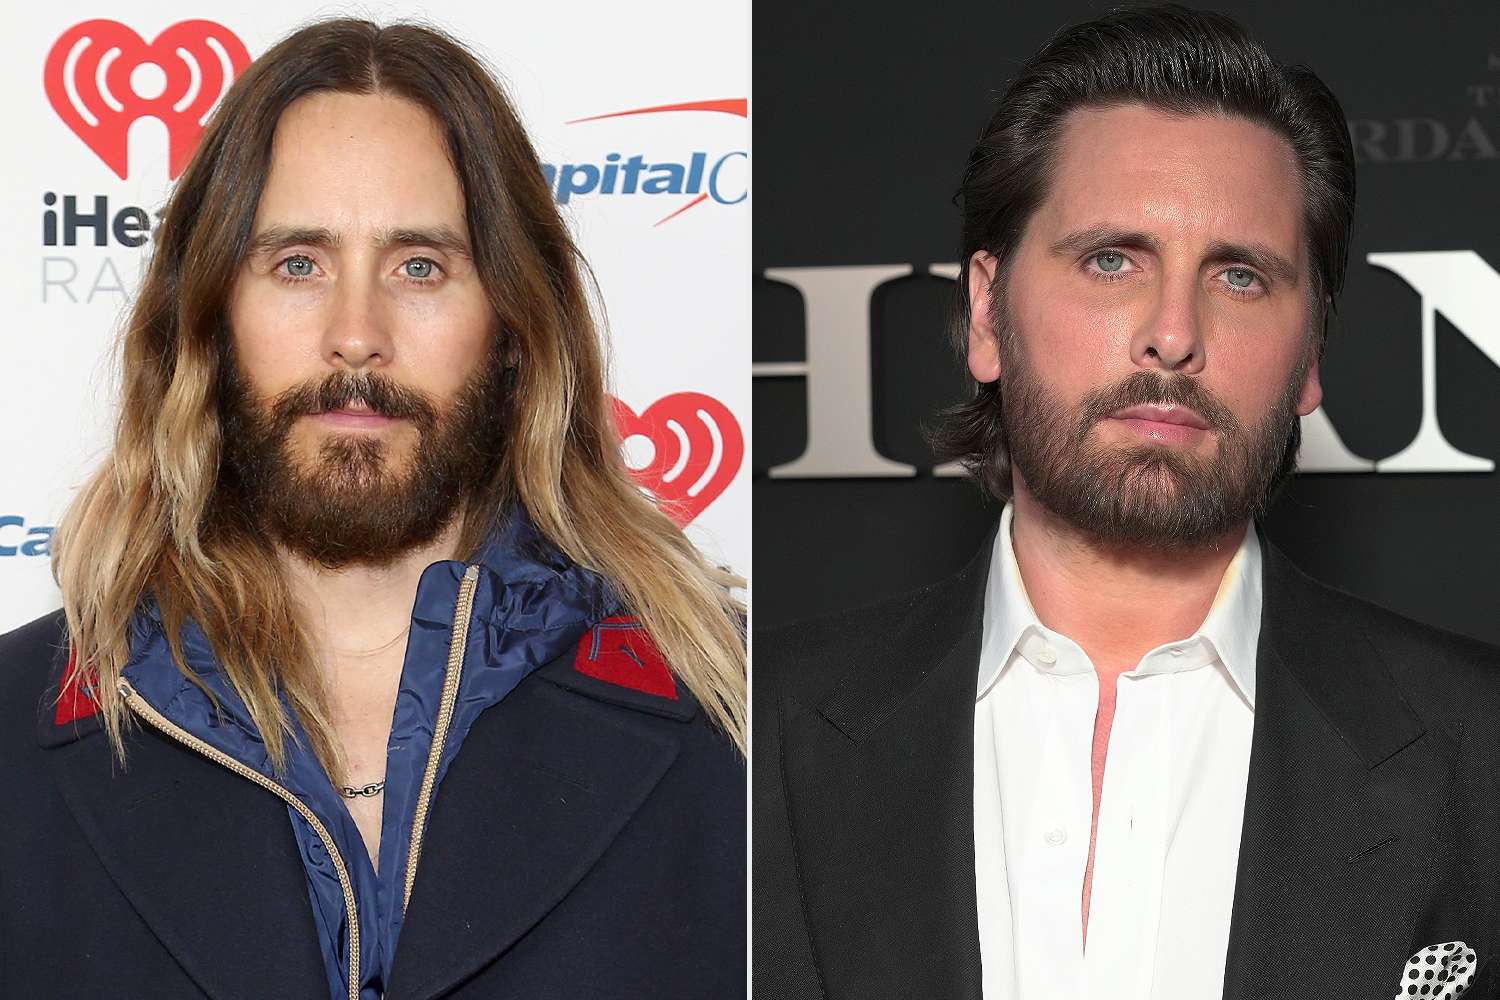 Jared Leto Reacts To Fans Comparing Him To Scott Disick